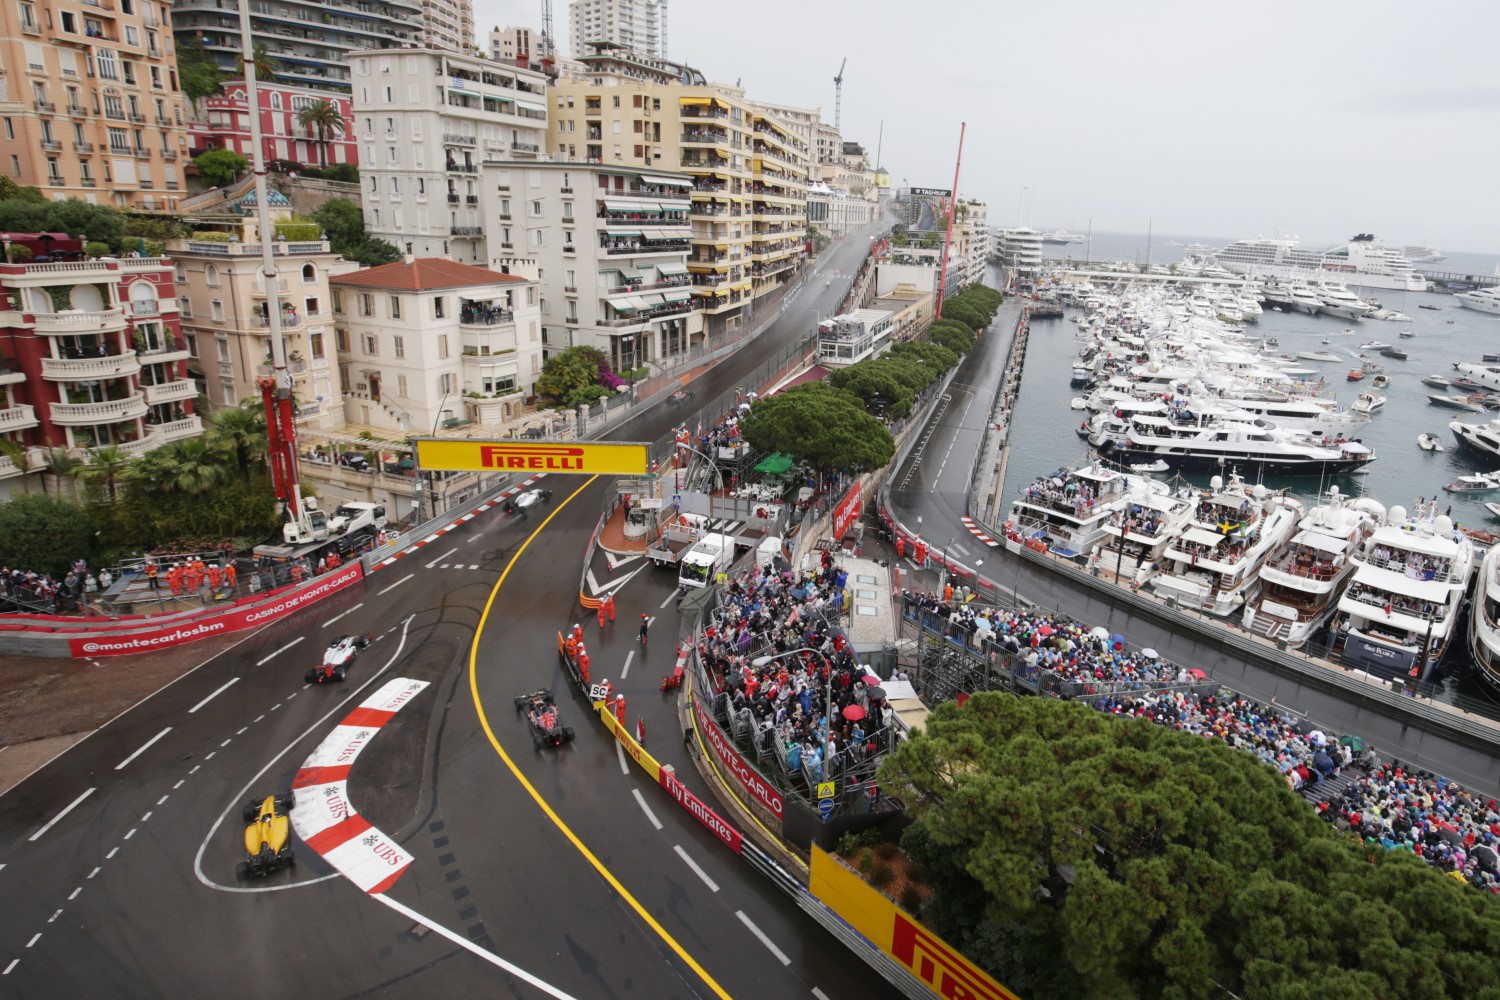 Monaco is a big money loser without a special deal